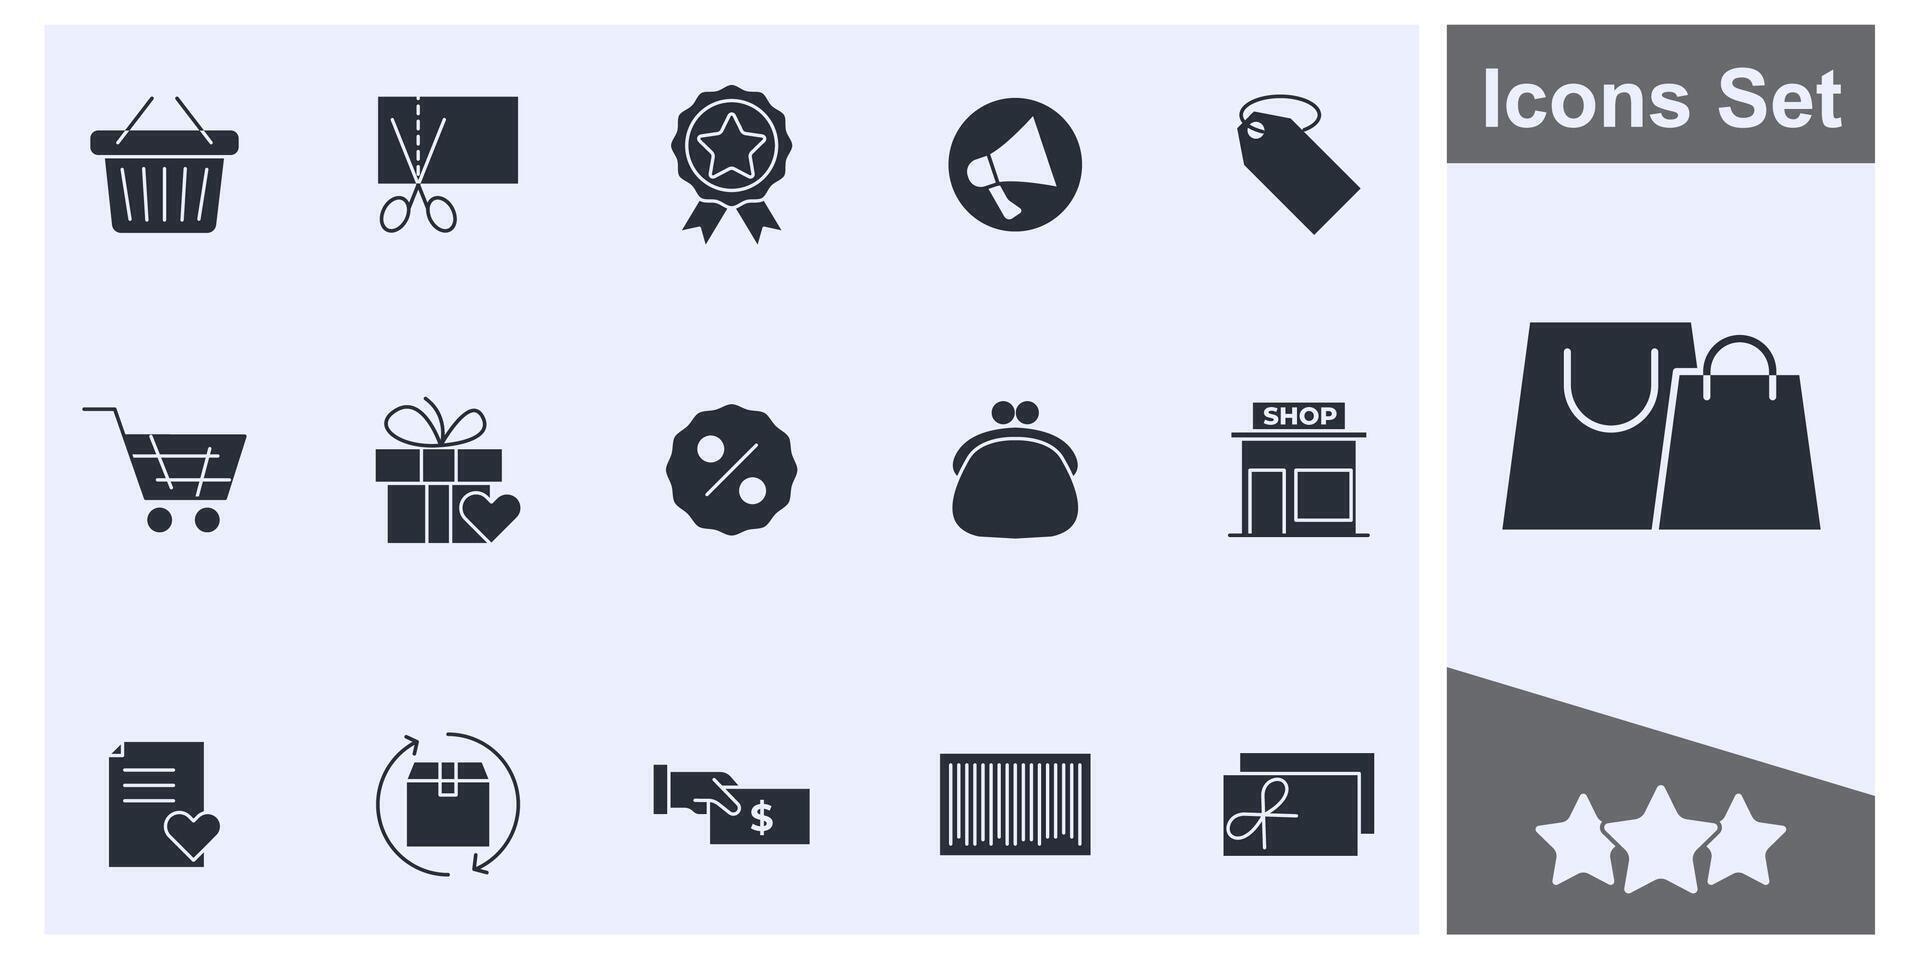 Shopping malls, retail icon set symbol collection, logo isolated illustration vector